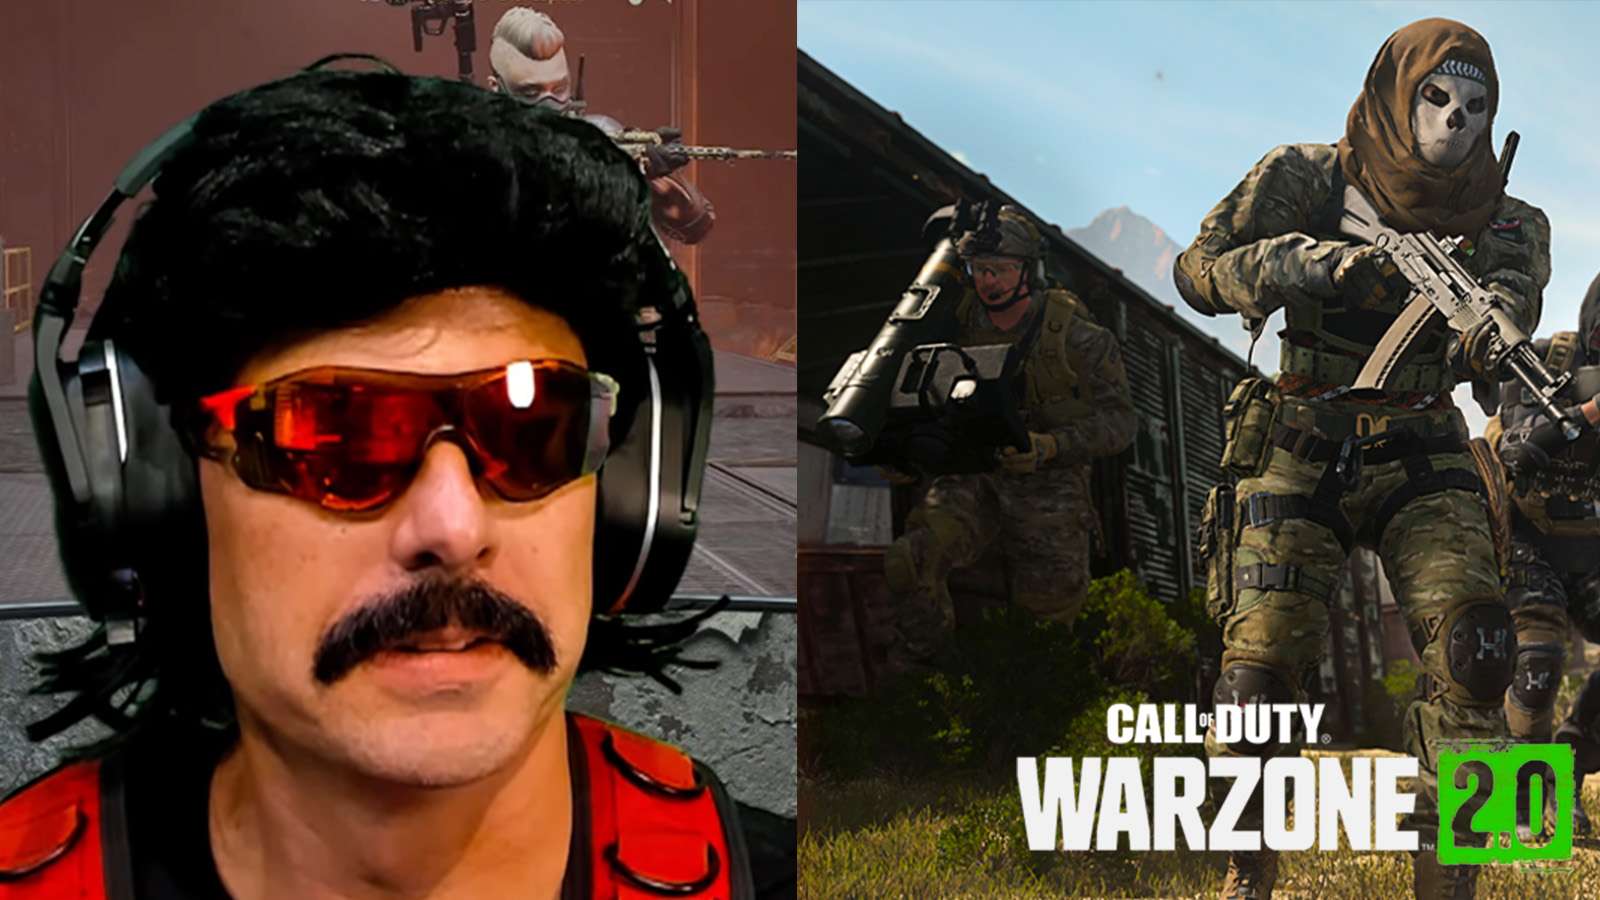 Dr Disrespect next to MW2 character and WZ 2.0 logo